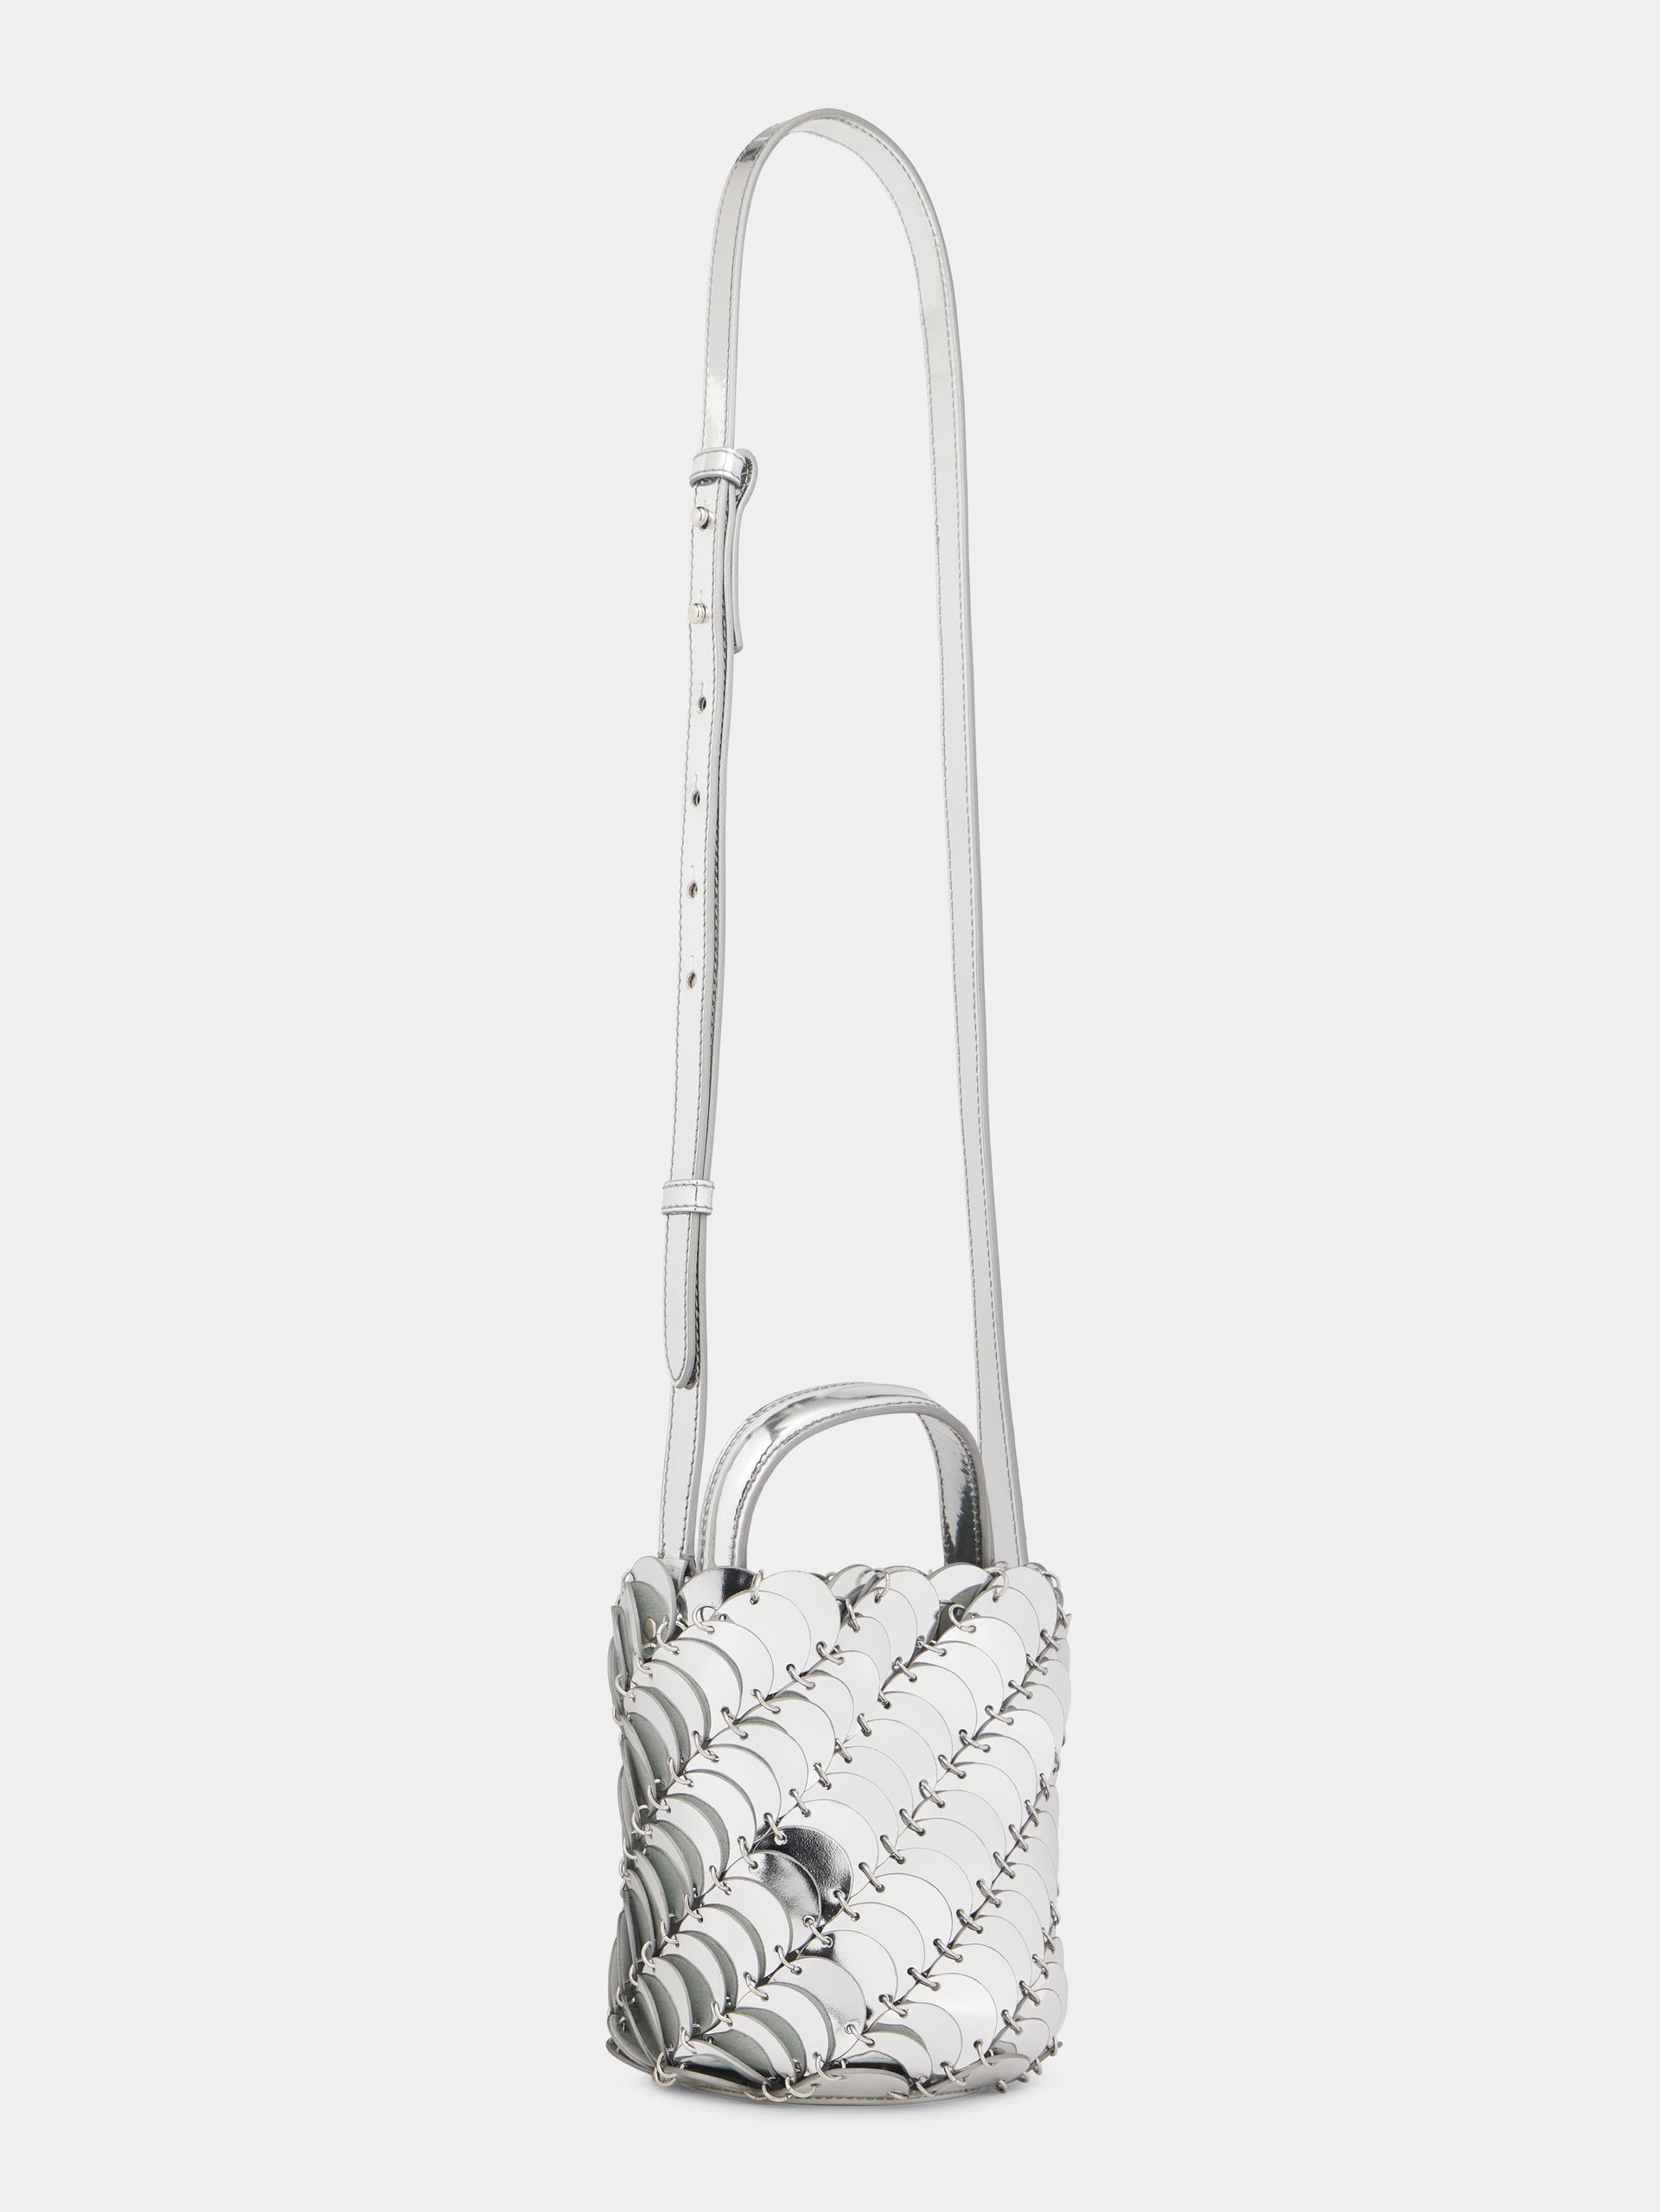 Medium silver BUCKET PACO BAG IN LEATHER